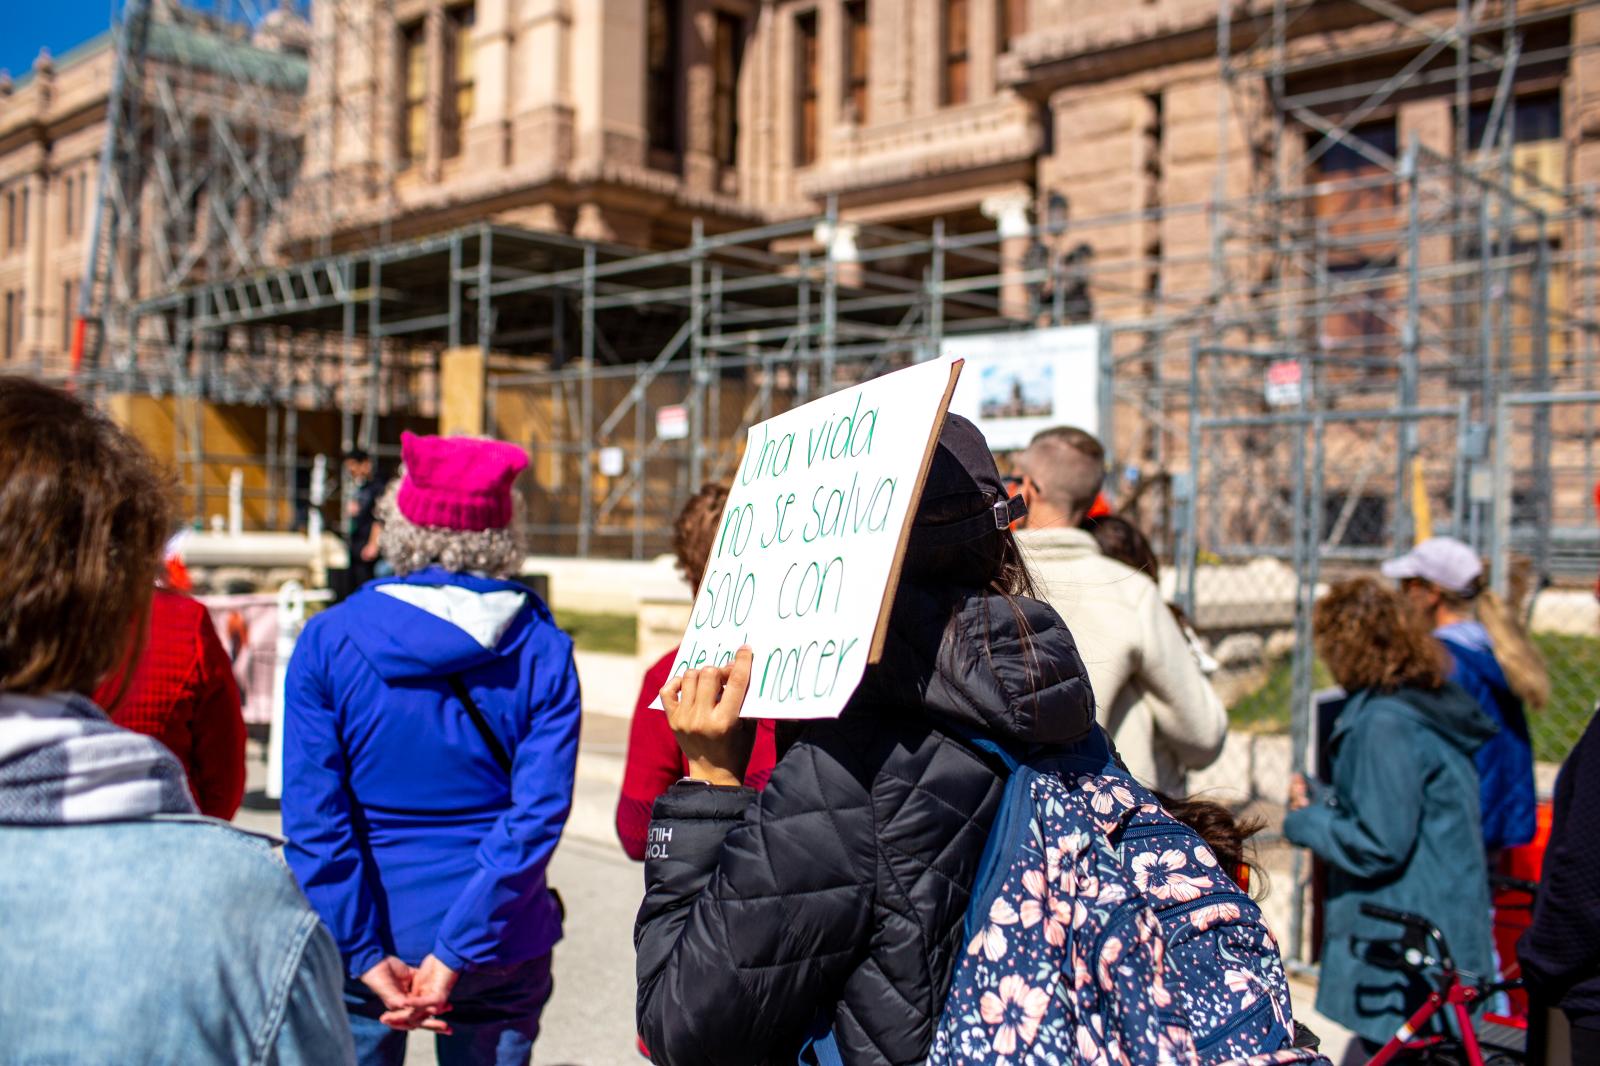 Signs held in protest and solid... Austin, TX, February 11, 2023.